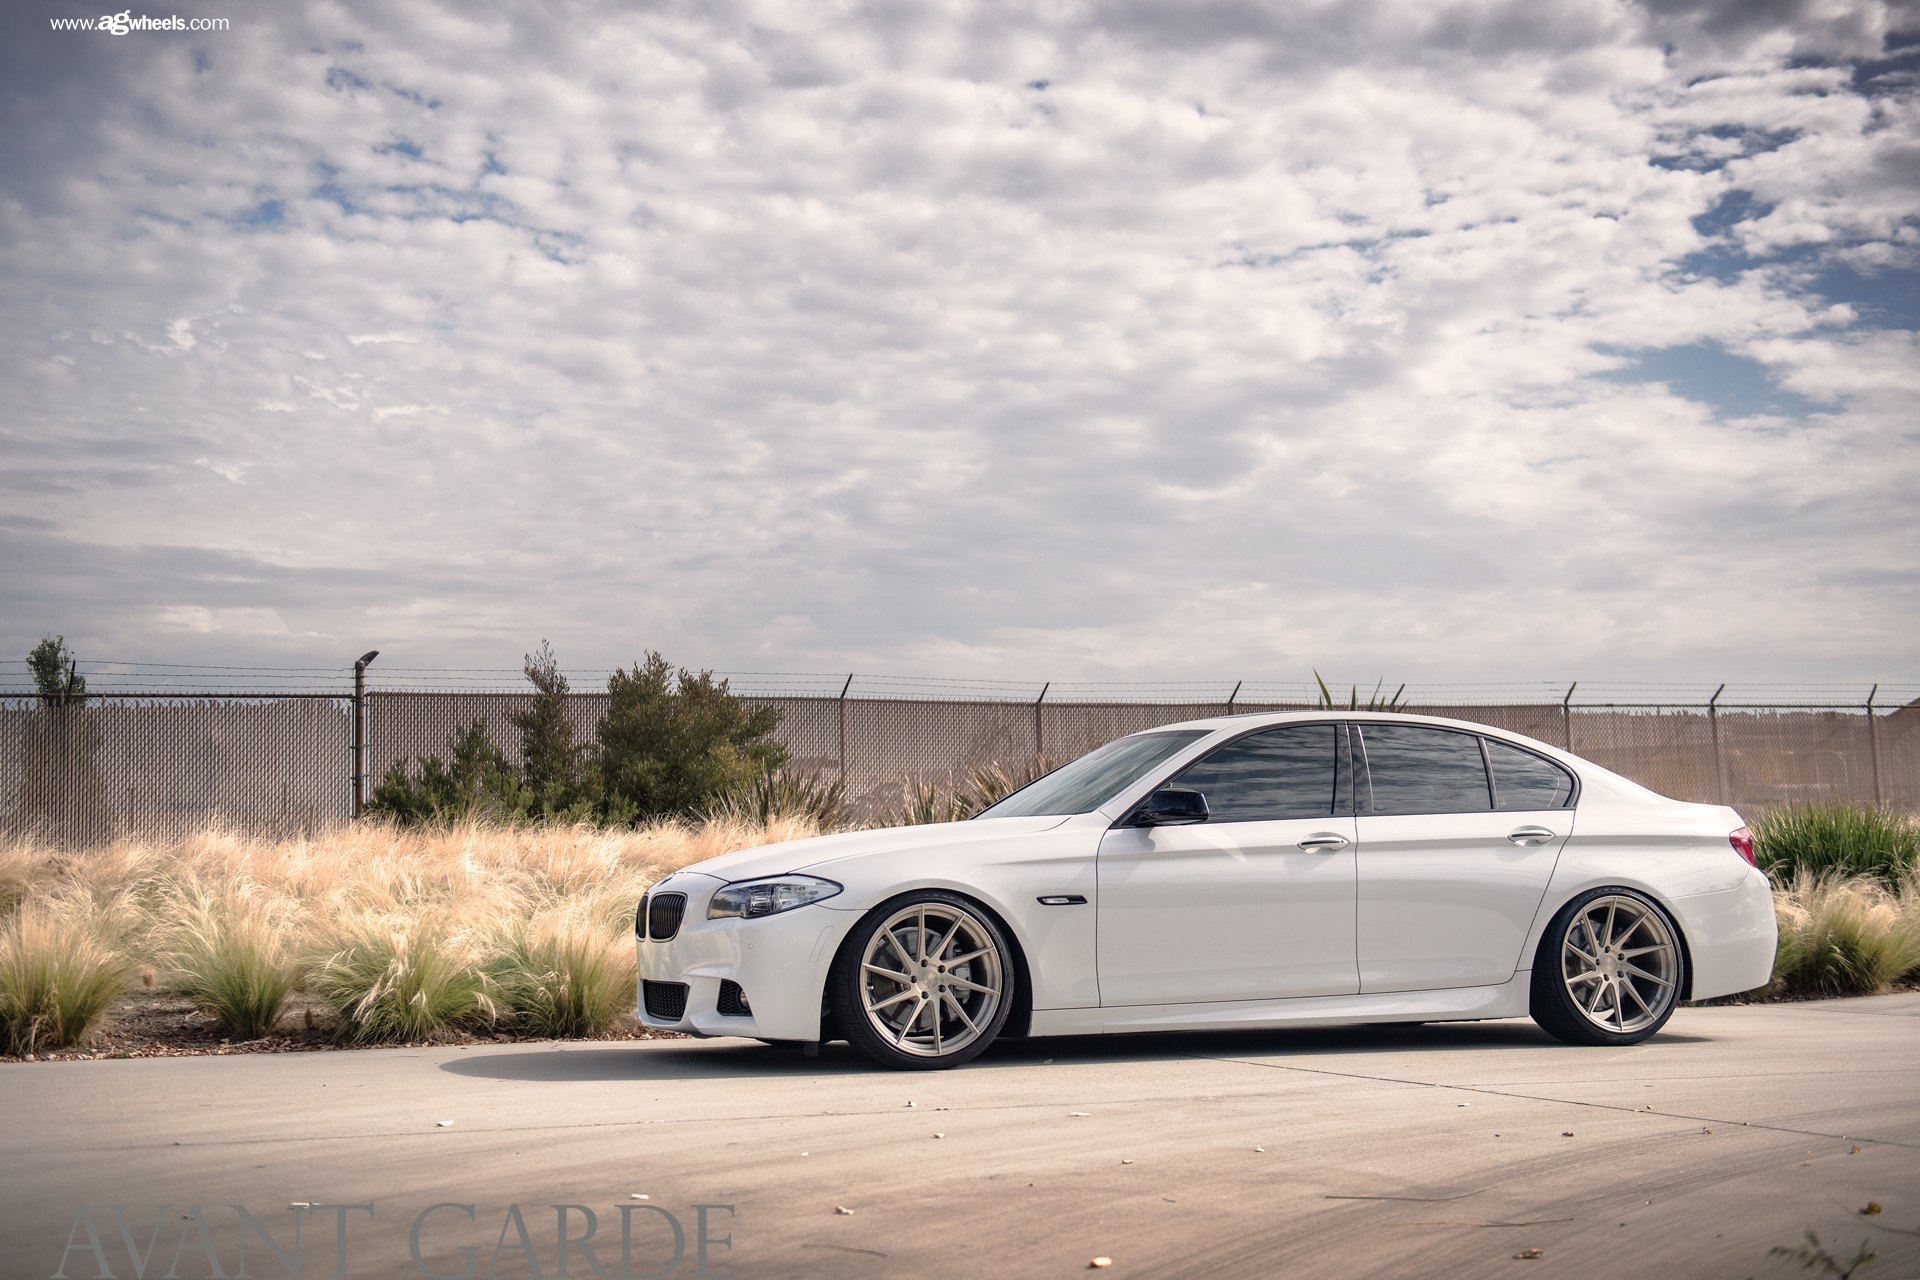 Aftermarket Side Mirrors on White BMW 5-Series - Photo by Avant Garde Wheels